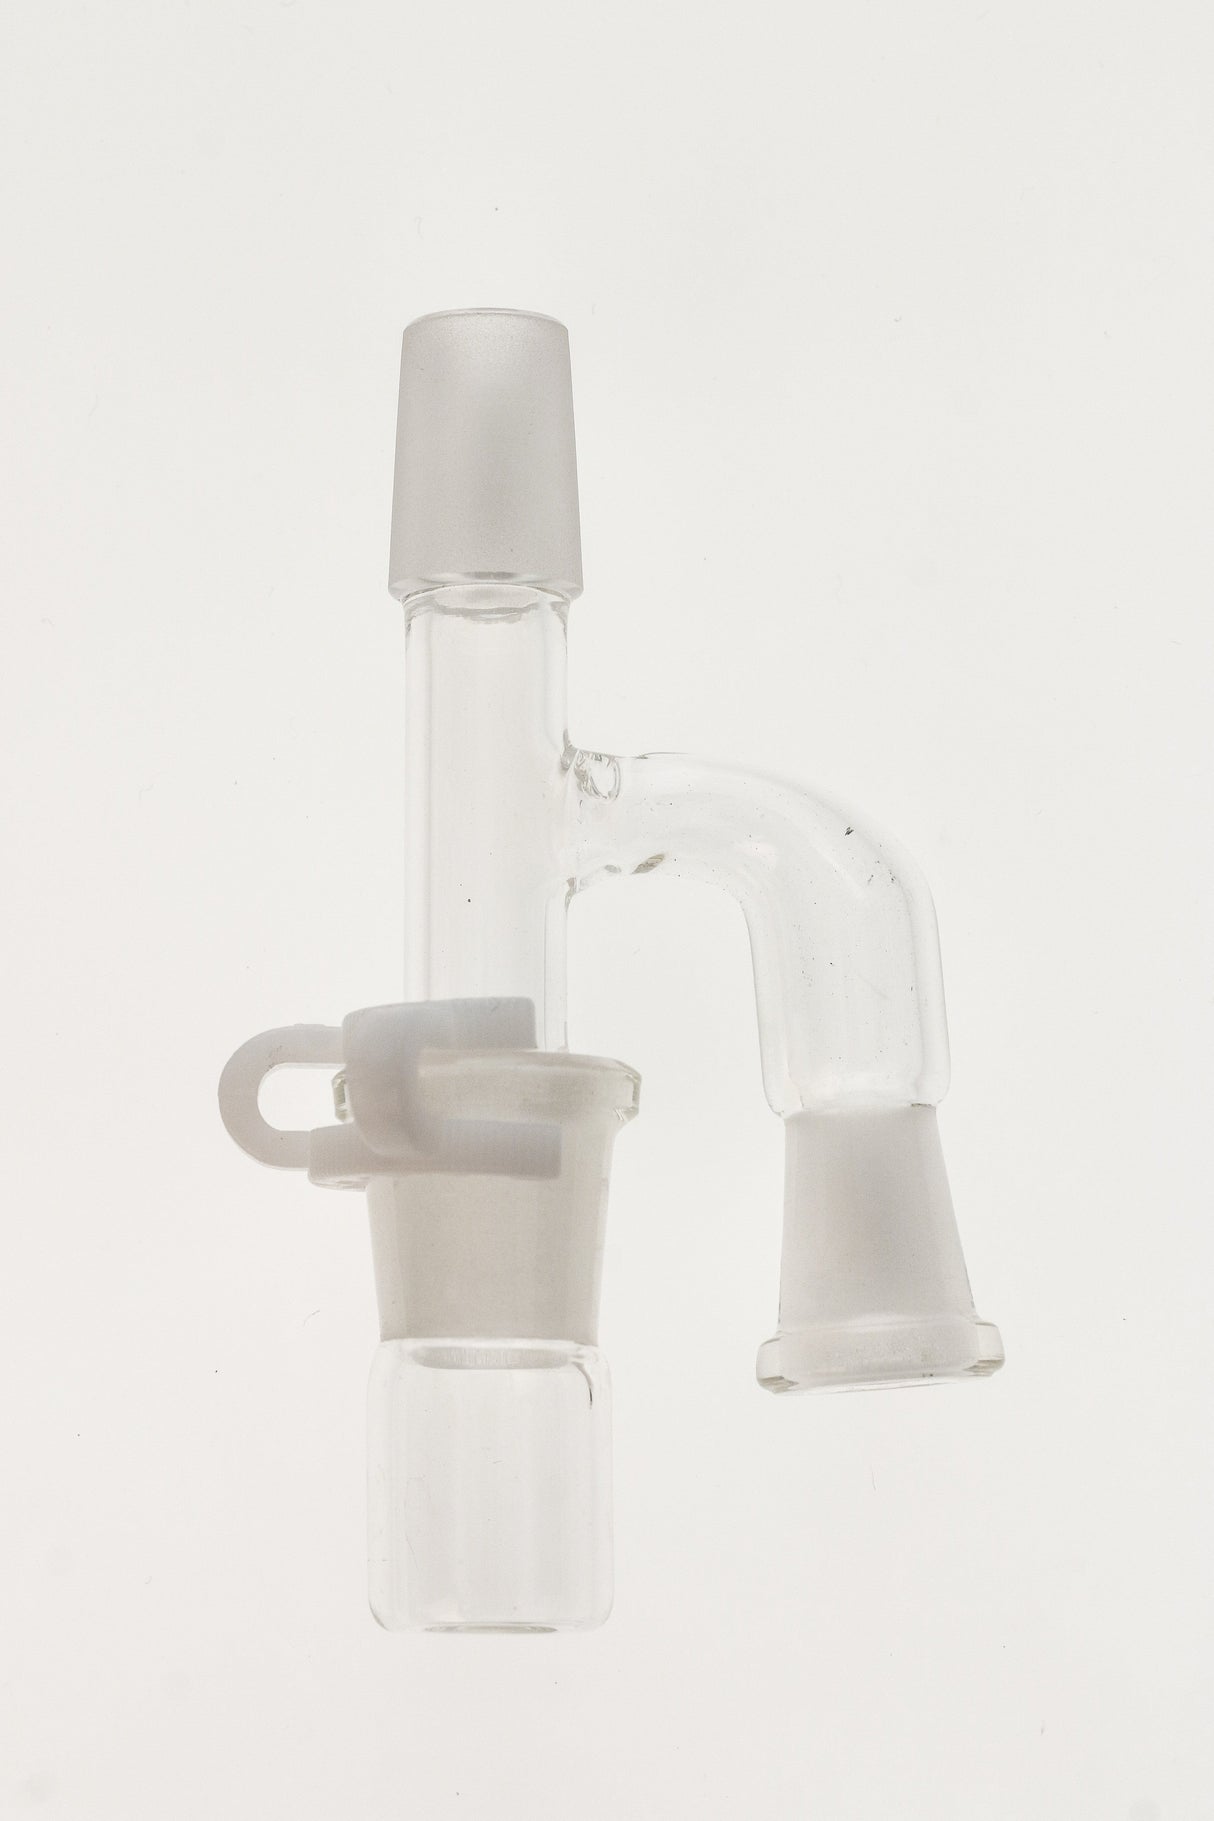 TAG Reclaim Adapter with Dish & Clip for Bongs, Female Joint, Side View on White Background